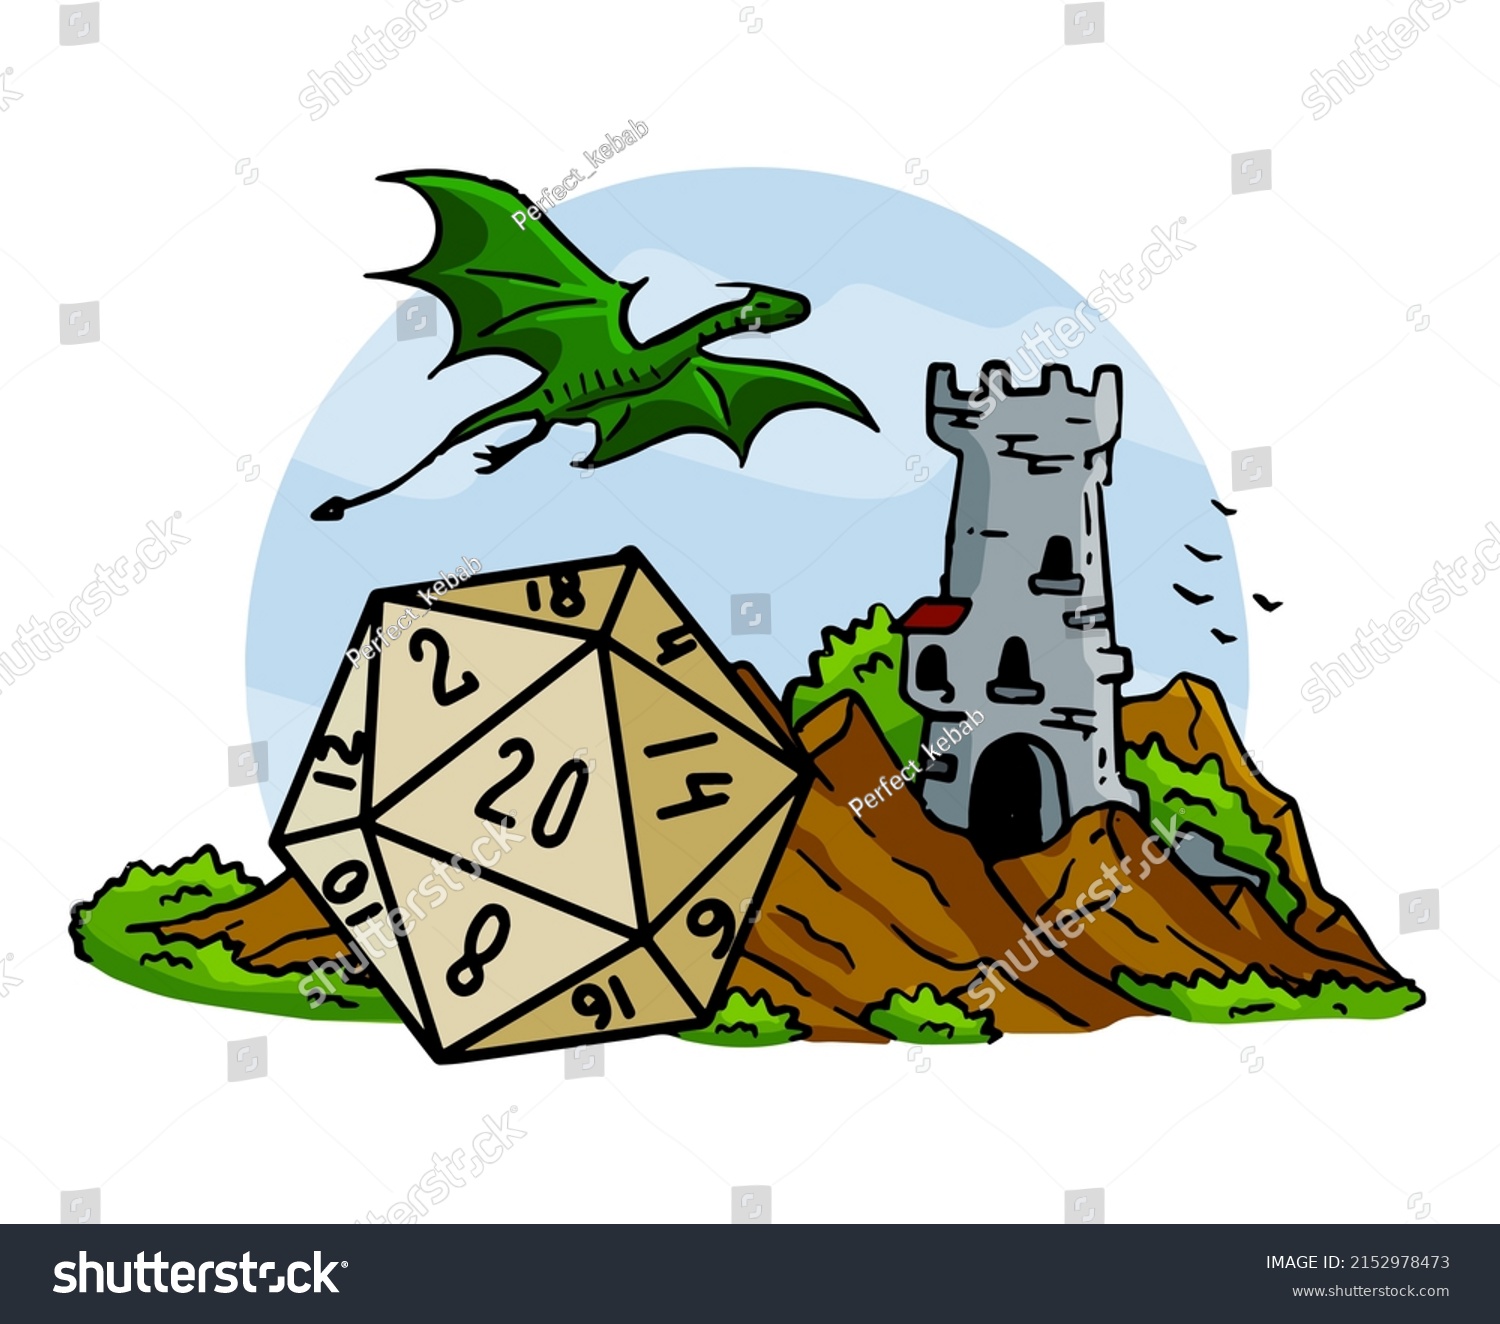 SVG of Tabletop RPG game with 20d dice. Castle fort with tower. Fantasy adventure and dragon. Mountain landscape. svg